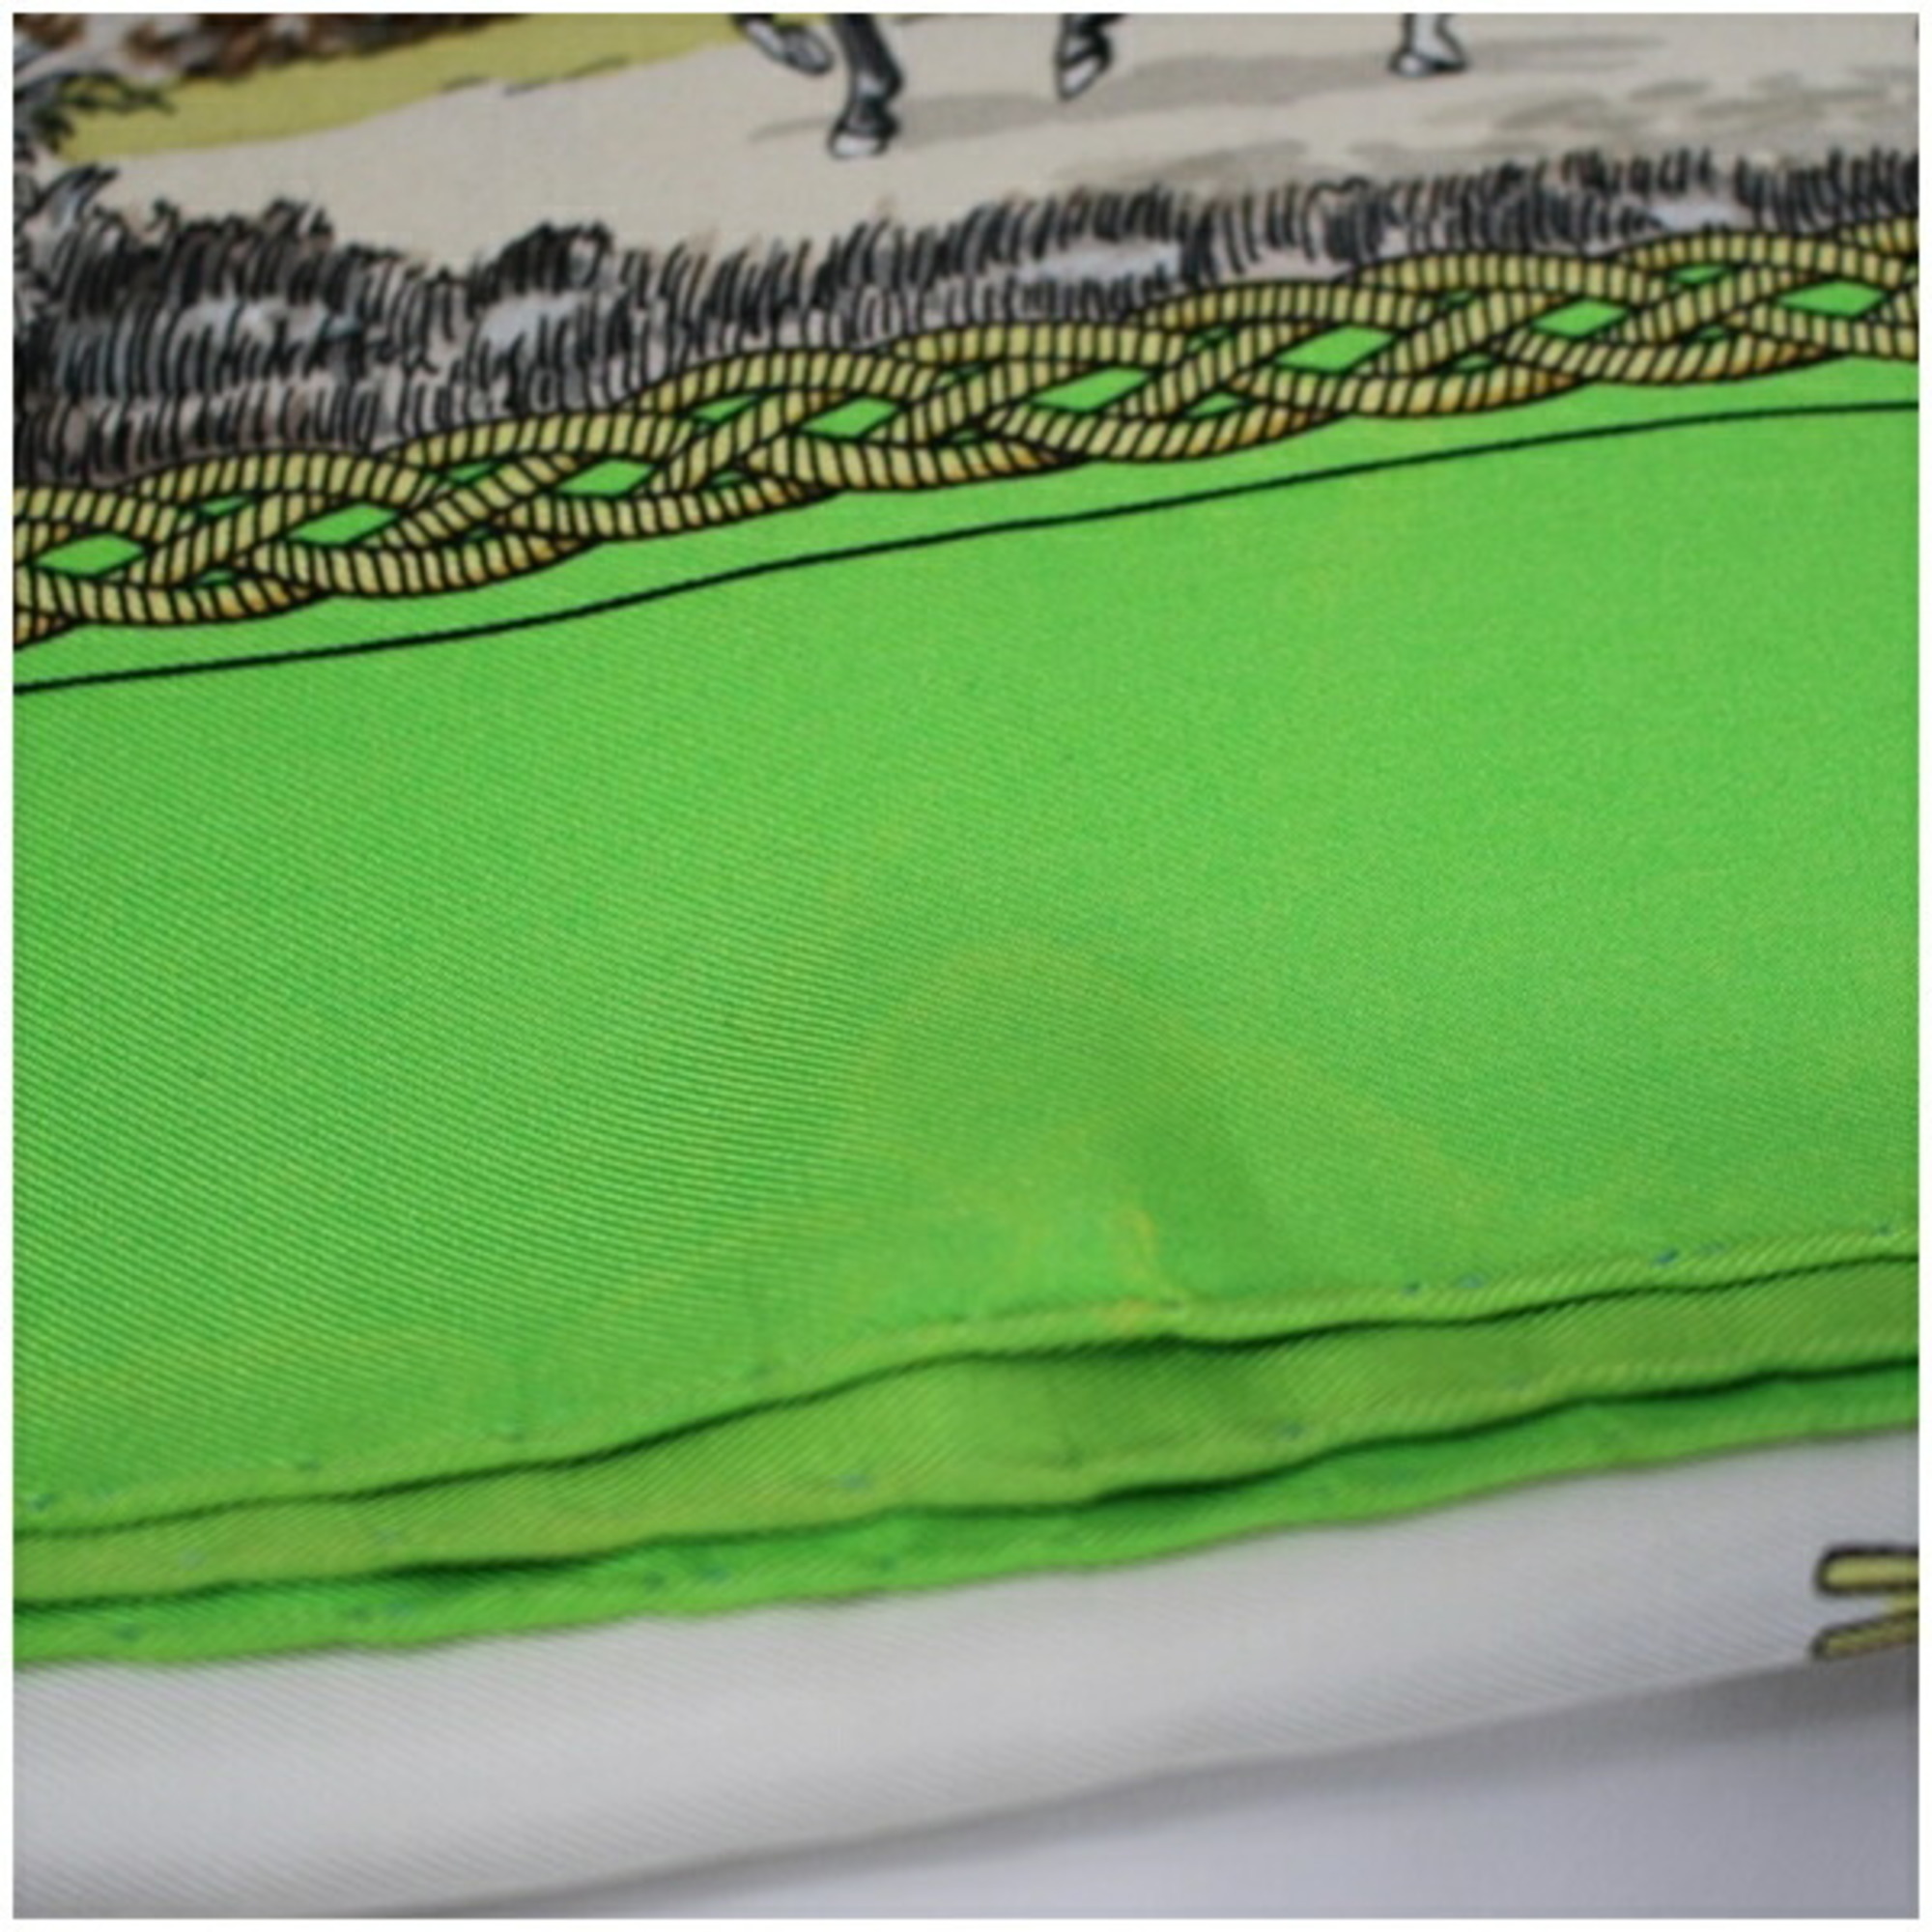 Hermes Carre 90 Silk Scarf Muffler GRANDS ATTELAGES Light Green x White Ladies Carriage Horse Tackle